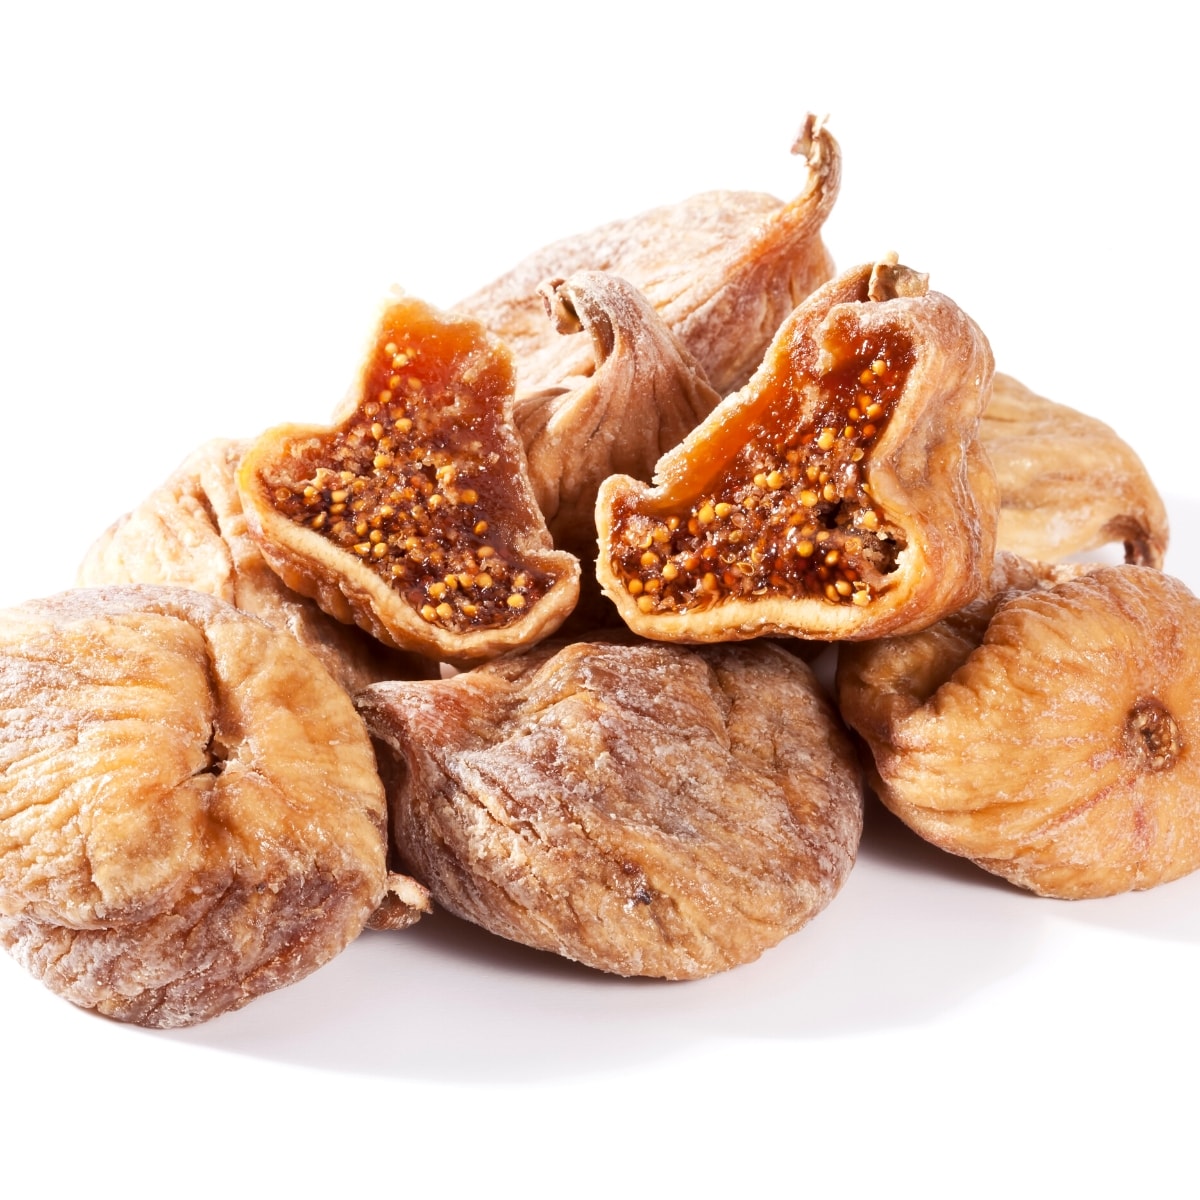 A pile of sliced dry figs.